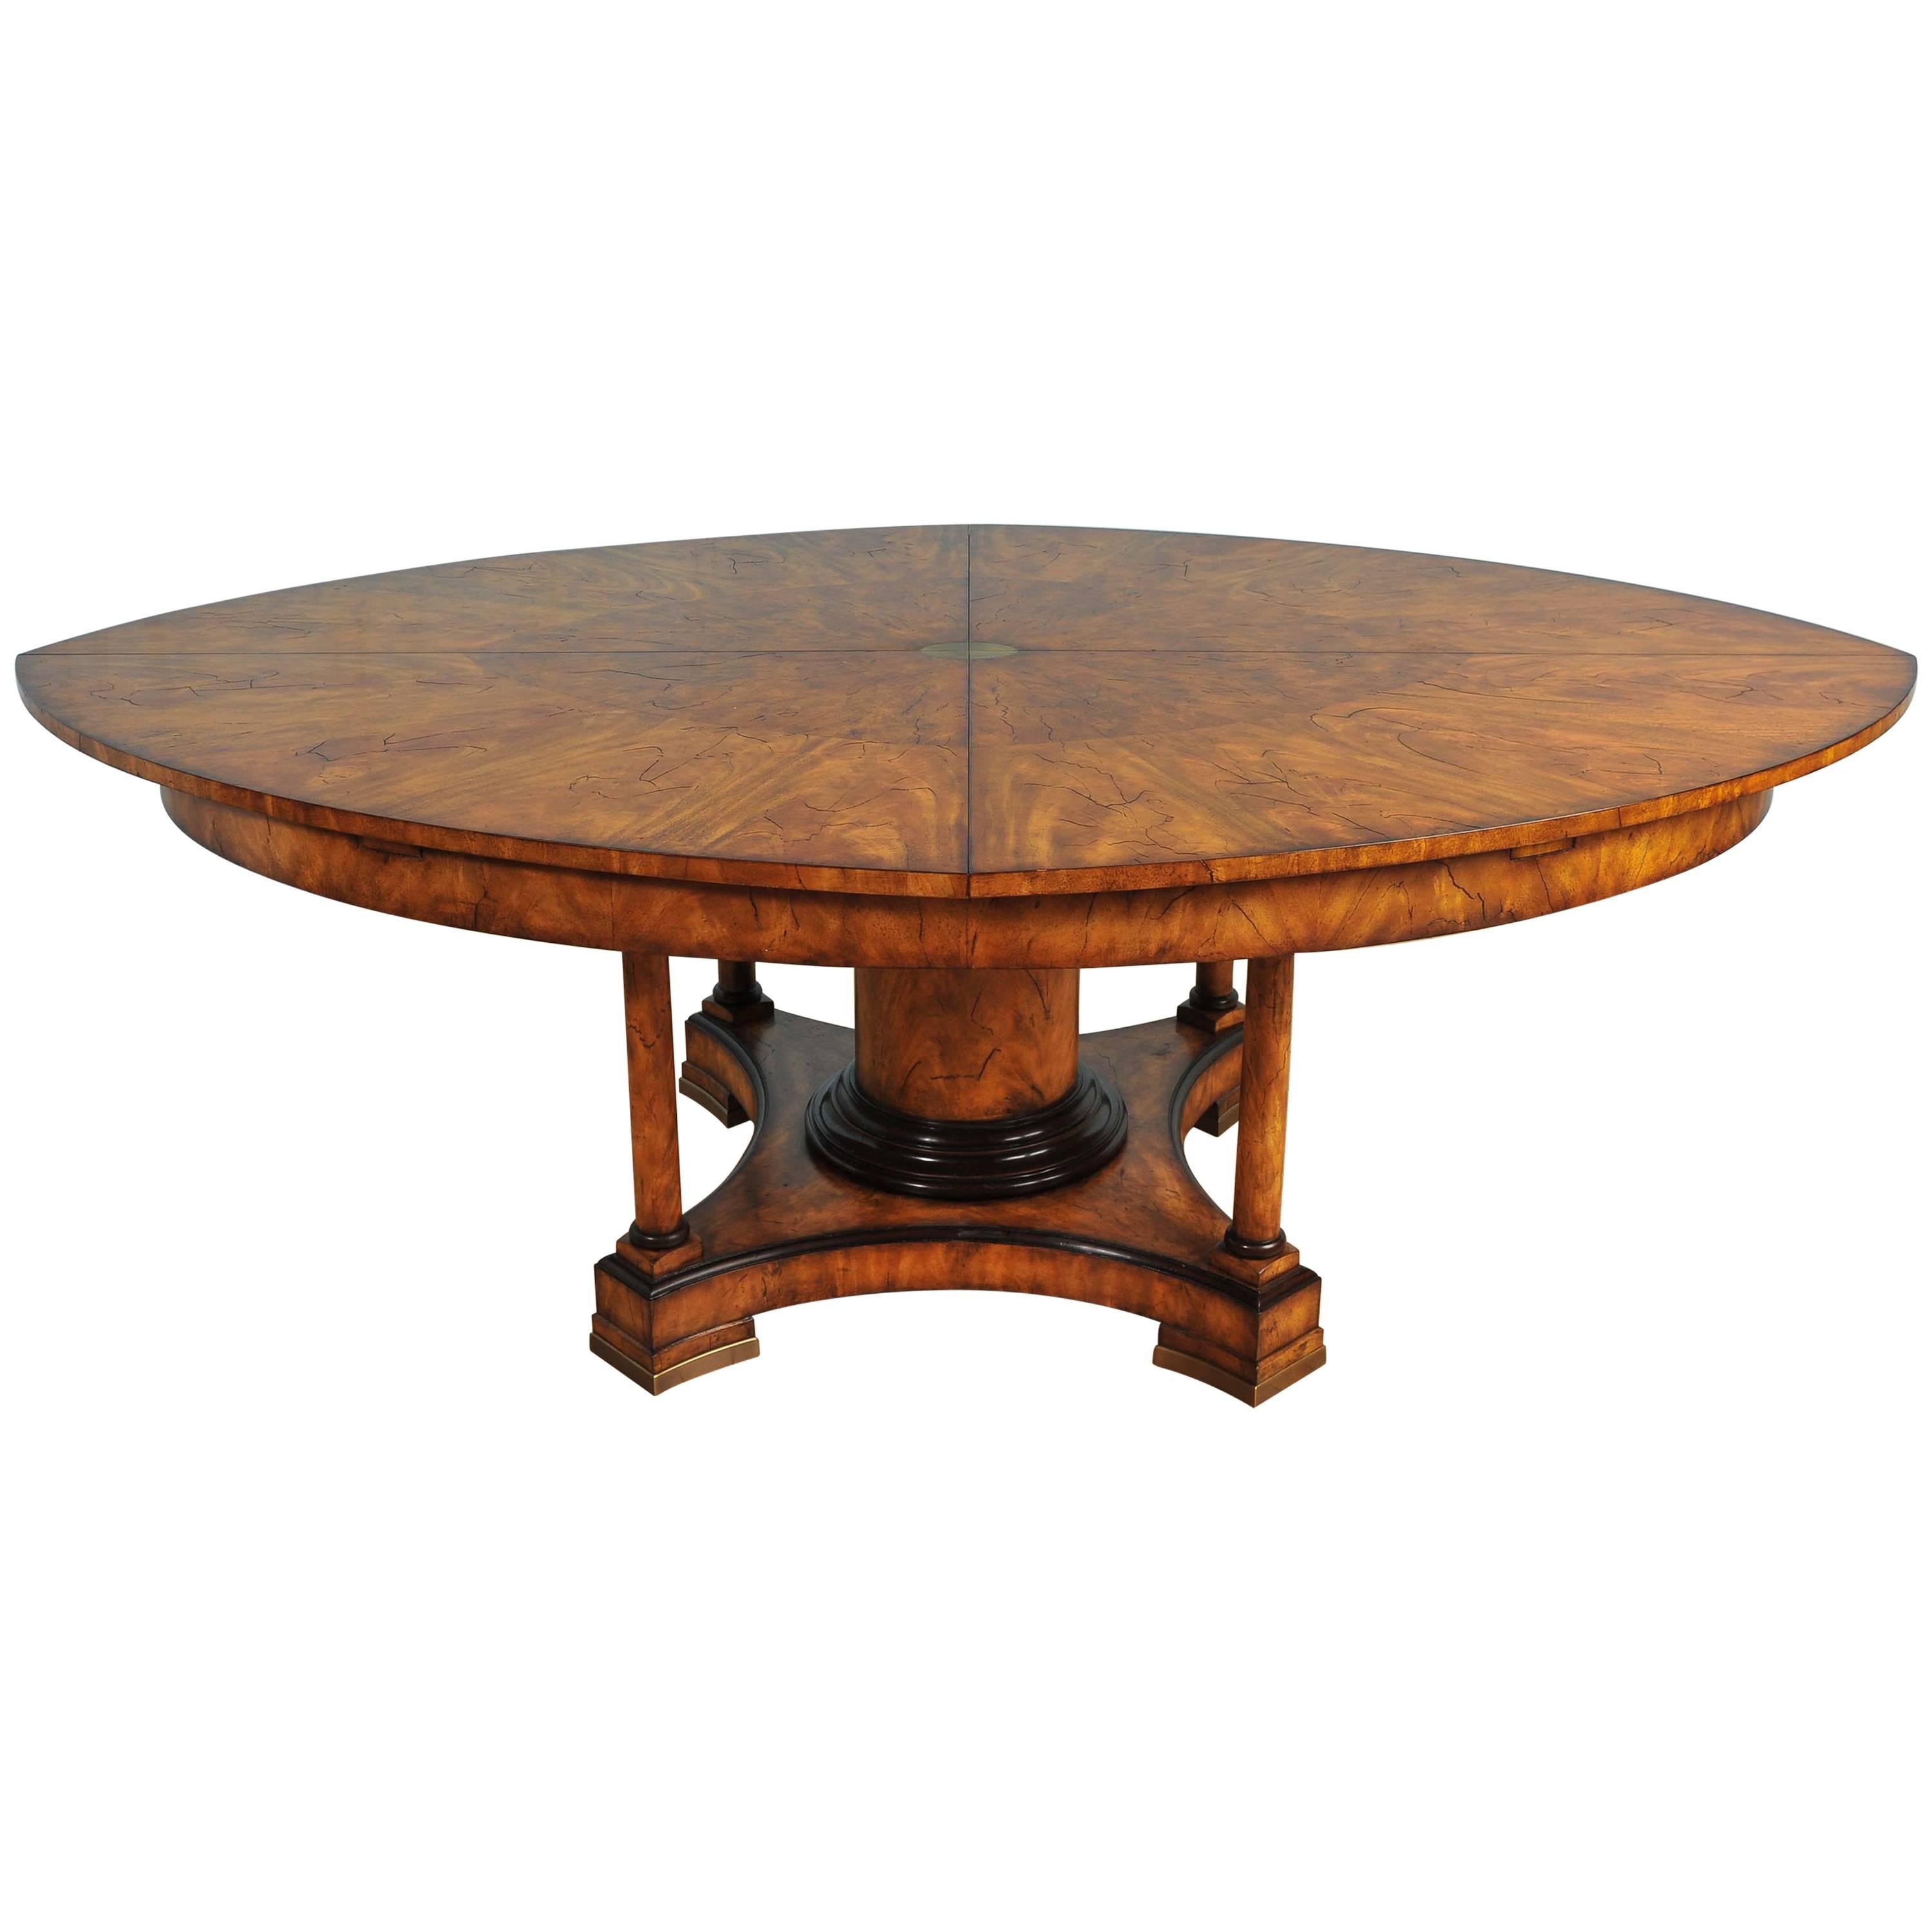 Oval Mahogany Extending Dining Table with Leaf Rack